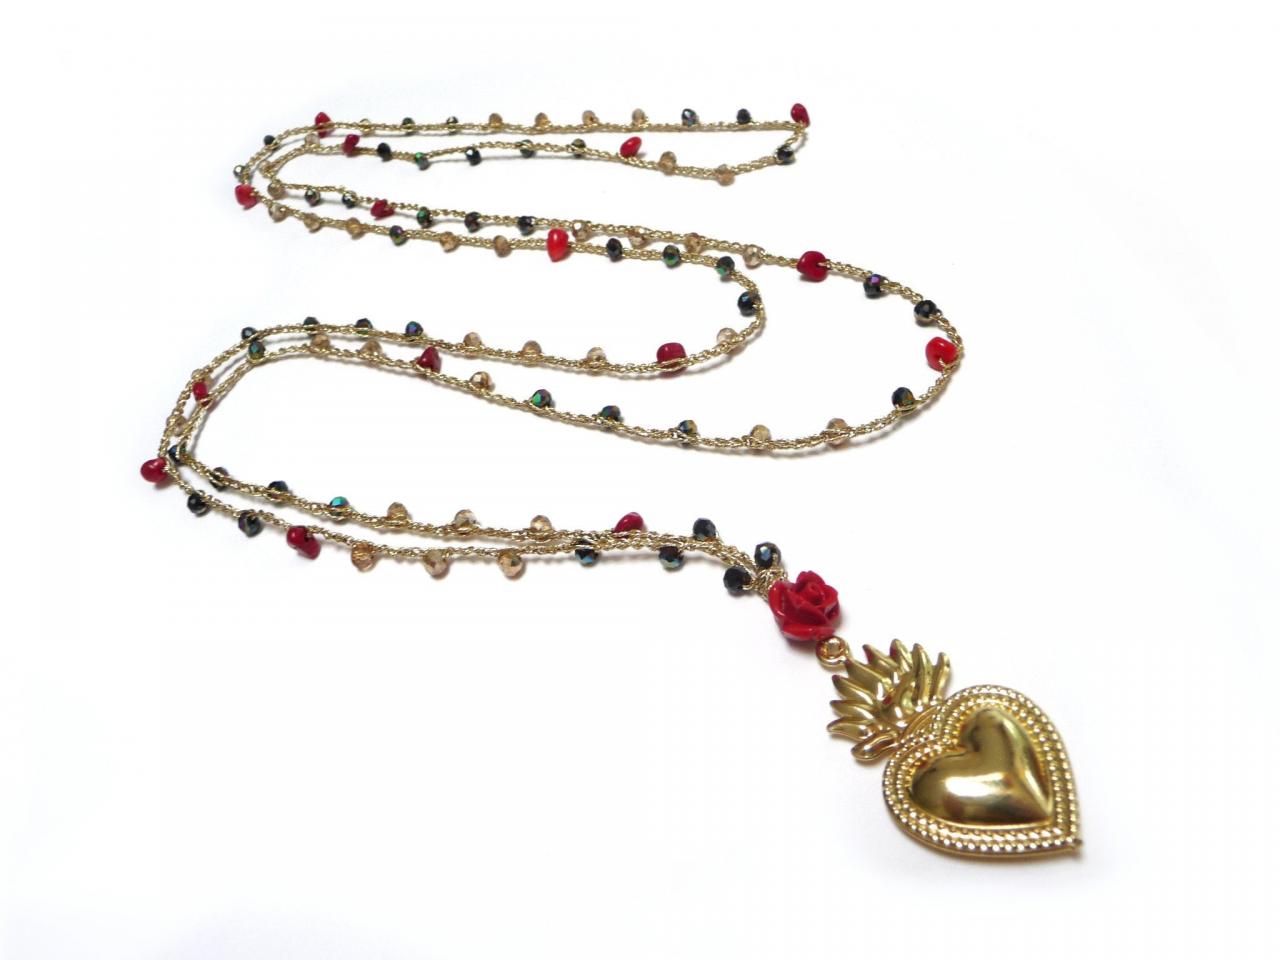 Gold Sacred Heart Necklace, Long Beaded Crochet Necklace With Red Coral Chips + Gold And Black Crystals, Milagro Heart Pendant Mexican Style